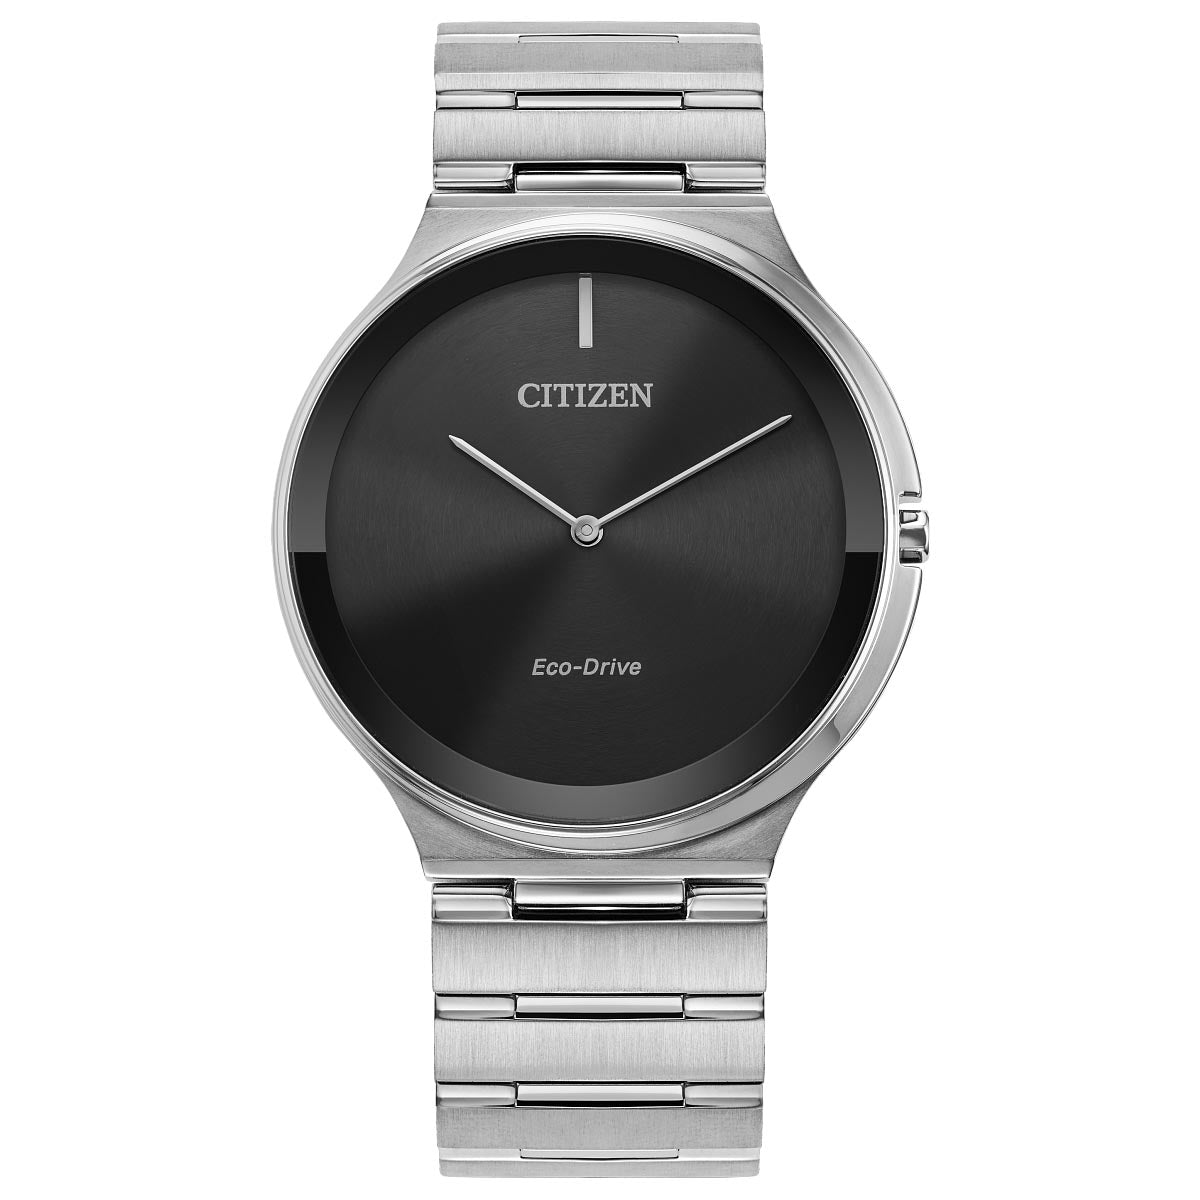 Citizen Stiletto Mens Watch with Black Dial and Stainless Steel Bracelet (eco drive movement)